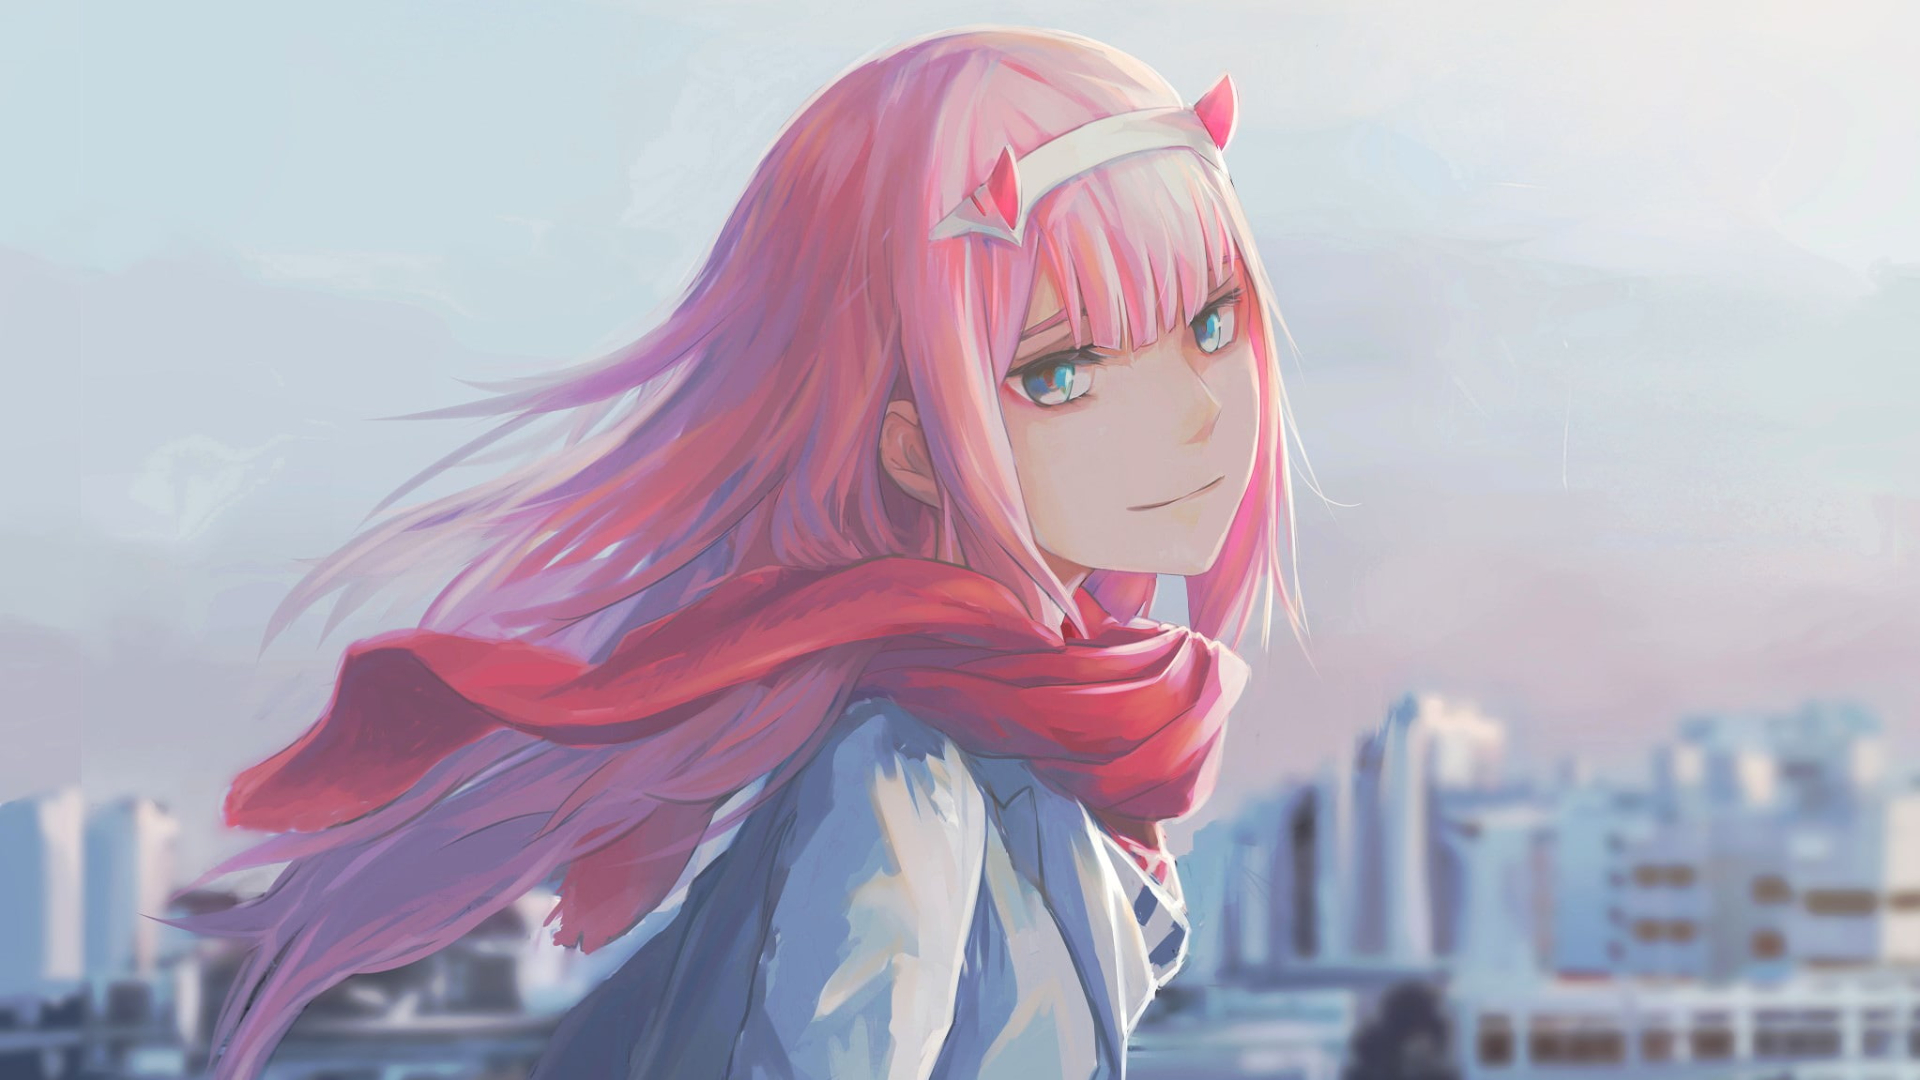 Anime Anime Girls Zero Two Darling In The FranXX Darling In The FranXX Pink Hair Blue Eyes Scarf Hor 1920x1080